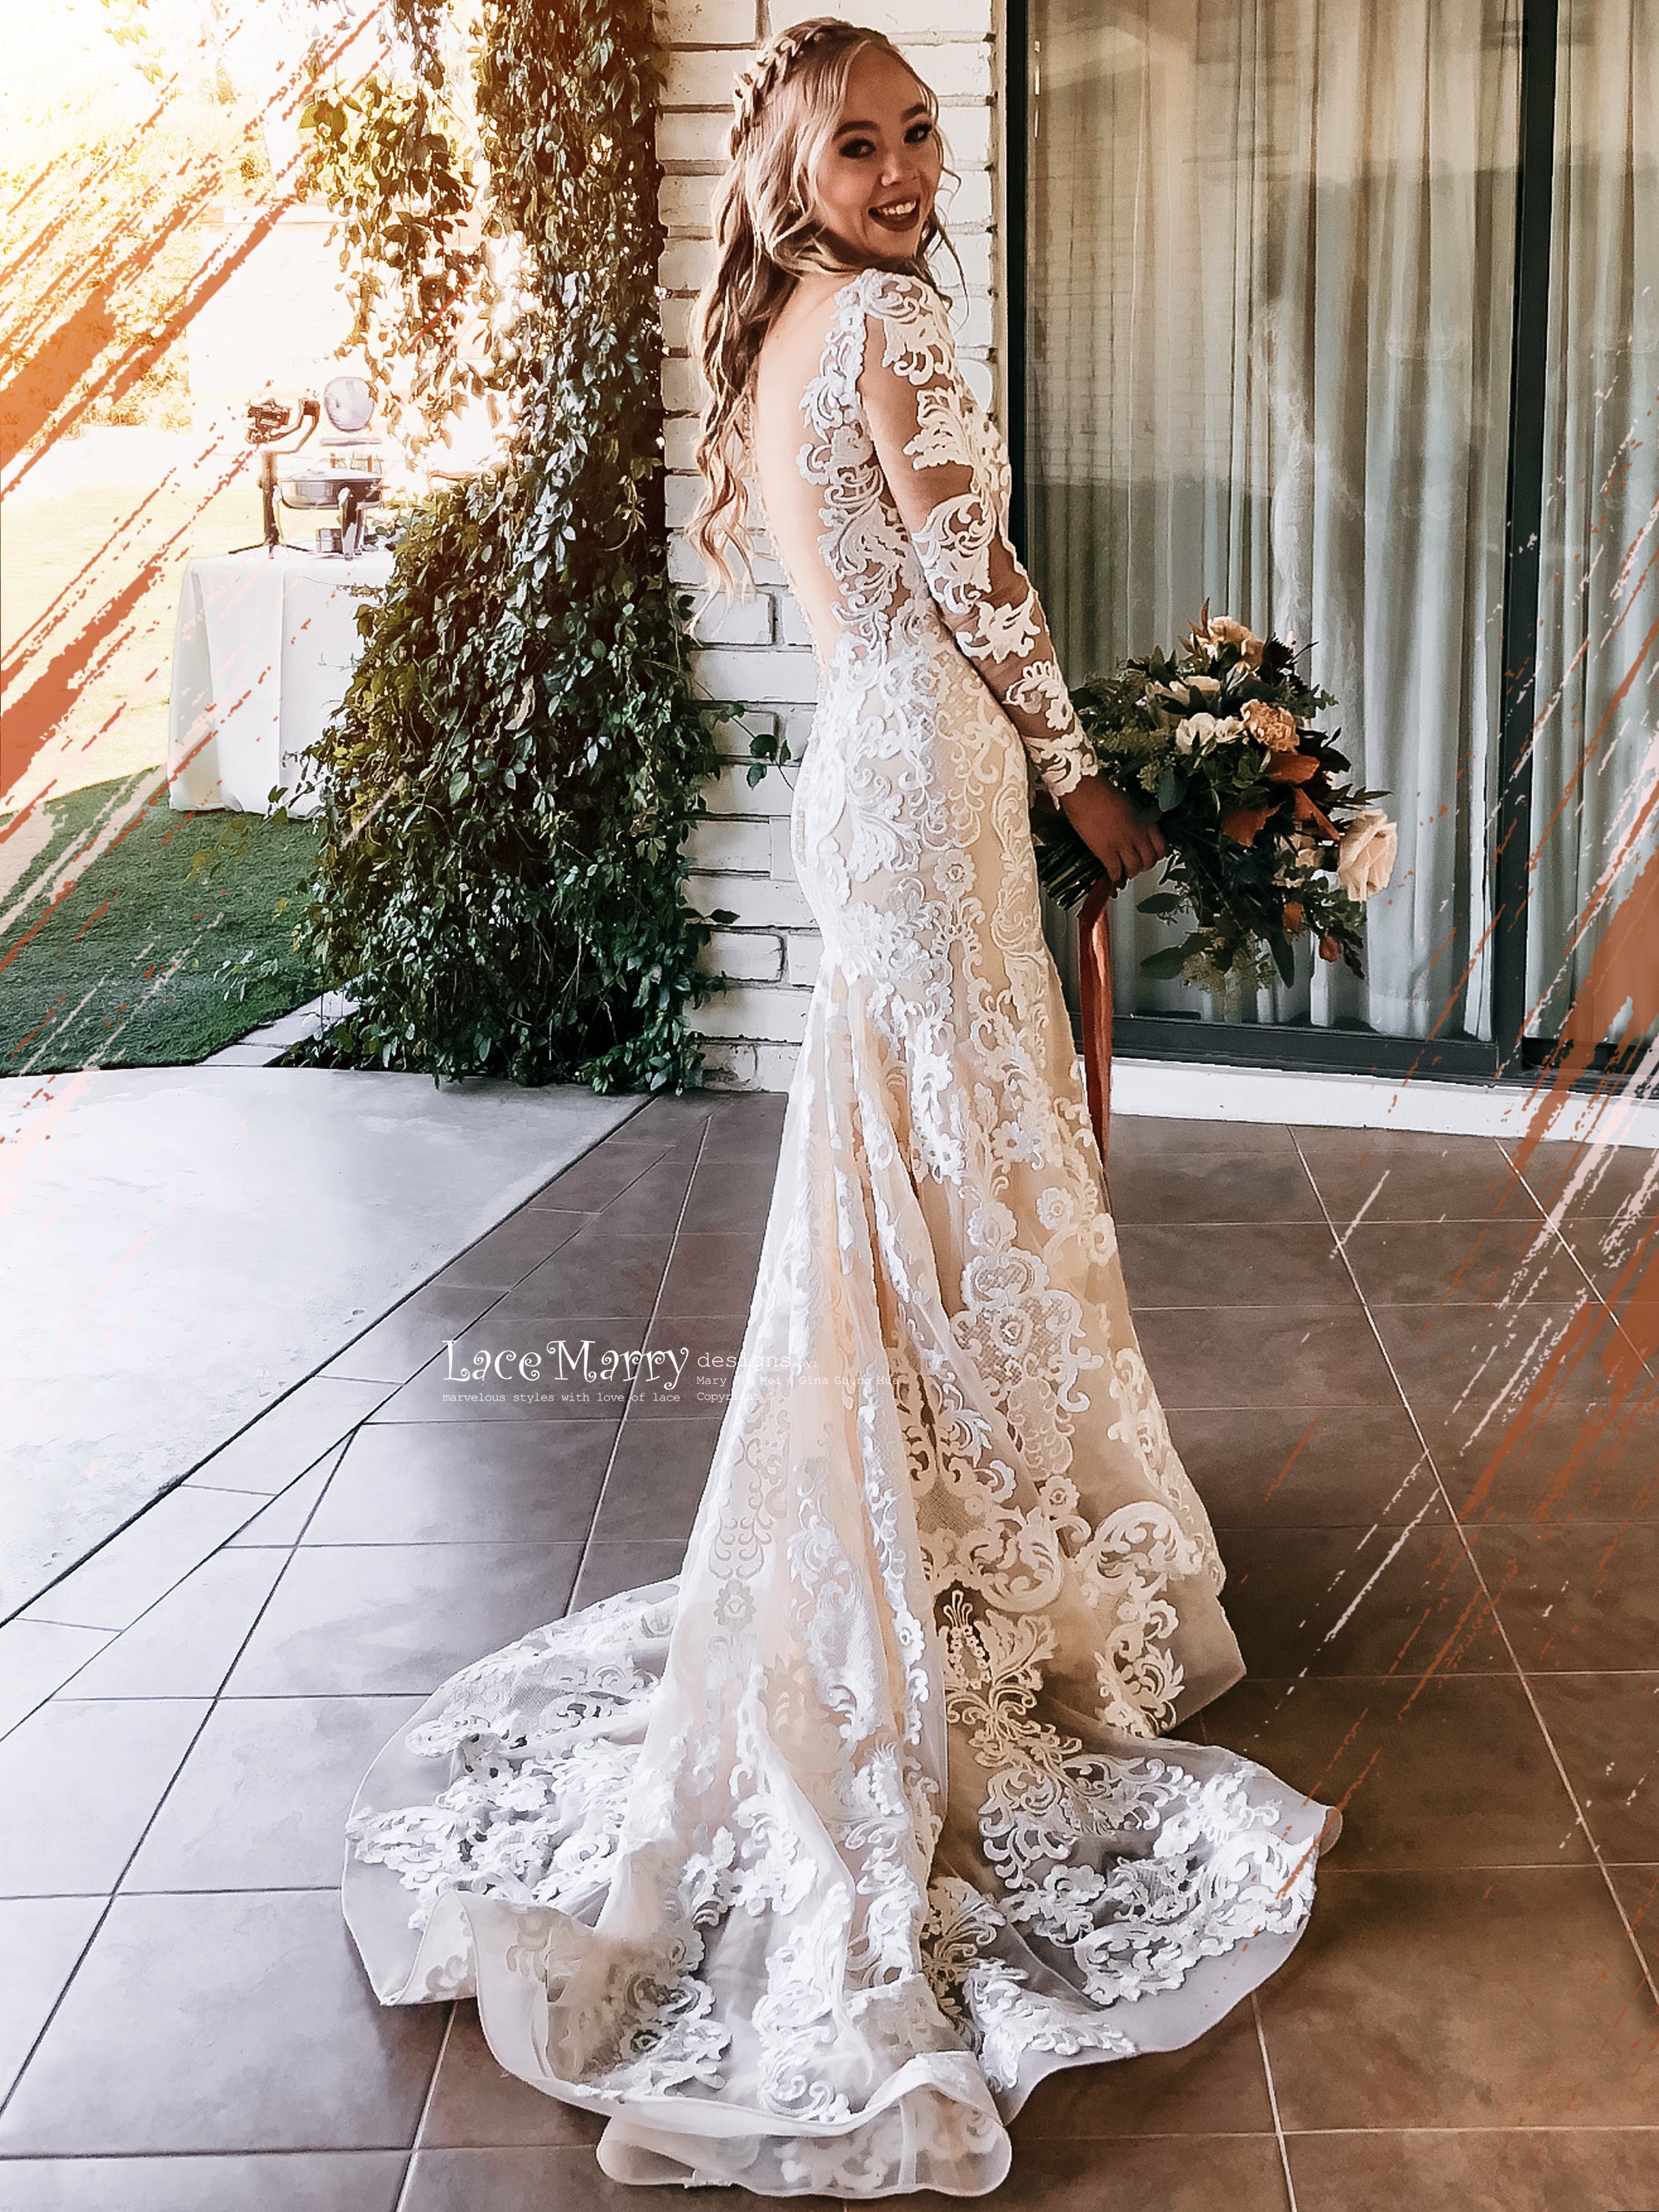 Our Favorite Wedding Dresses from Spring 2022 Bridal Fashion Week  Wedding  dress couture, Dream wedding ideas dresses, New wedding dresses